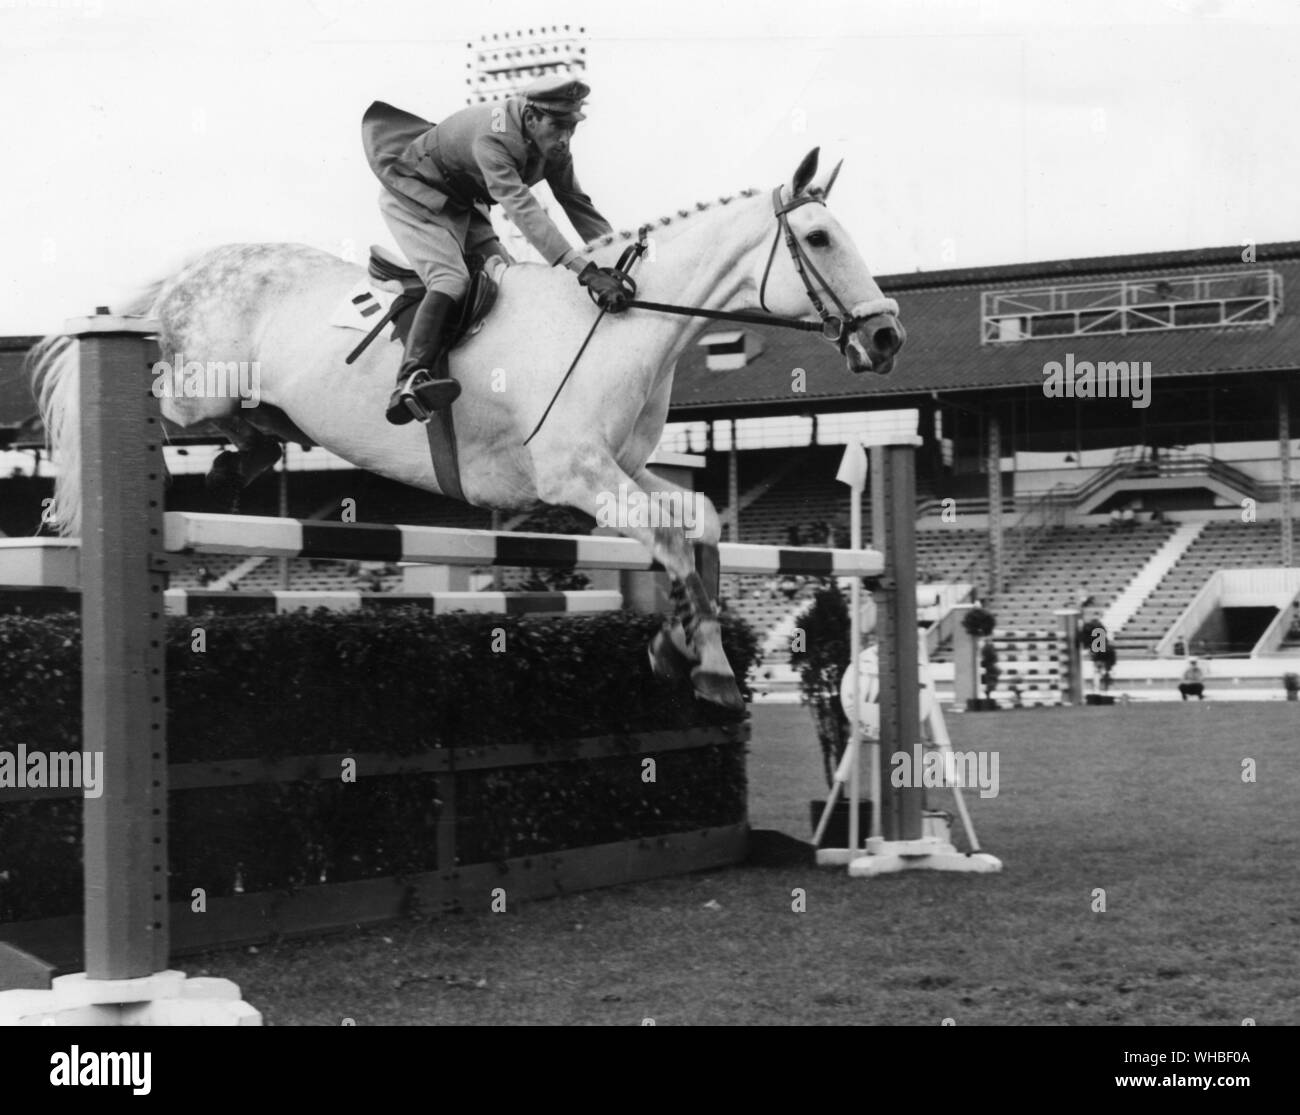 Pierro D' Inzeo riding the horse called The Rock. Winner of the King George V Cup at White City Stock Photo